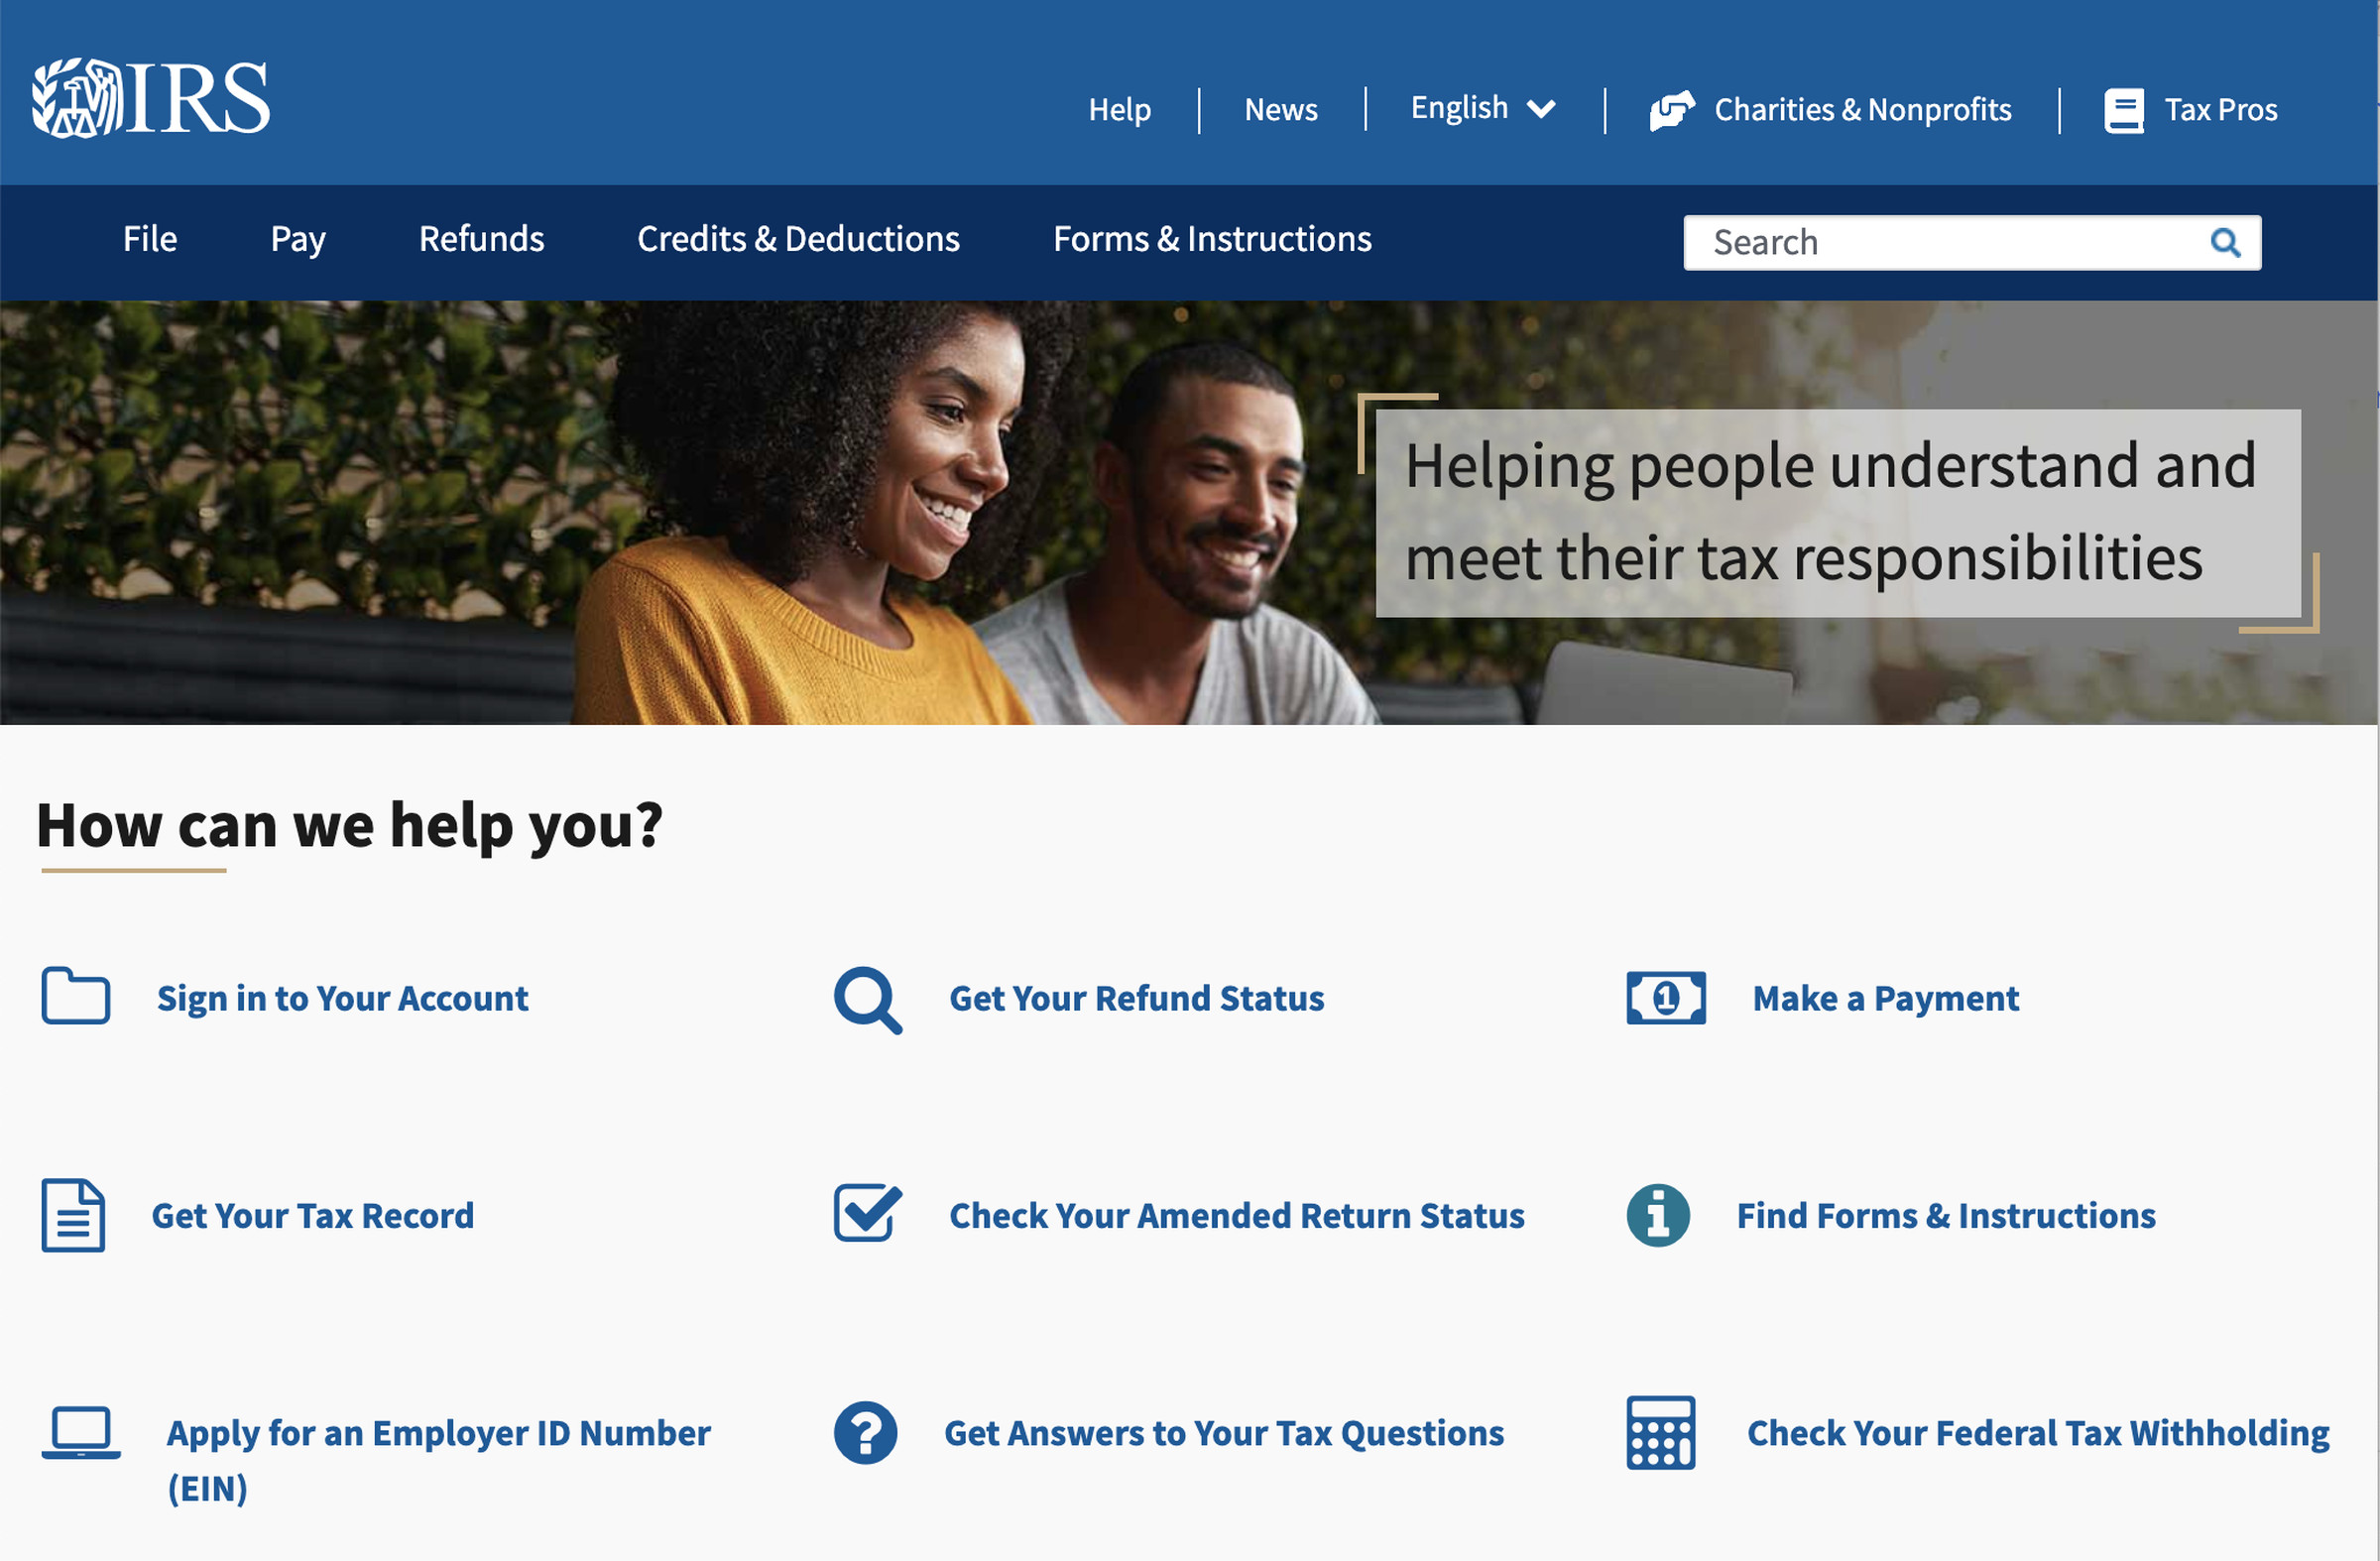 IRS website with smiling couple on top looking at tag “helping people understand and meet their tax responsibilities,” above a section labeled “how can we help you?” with nine links to different sections.